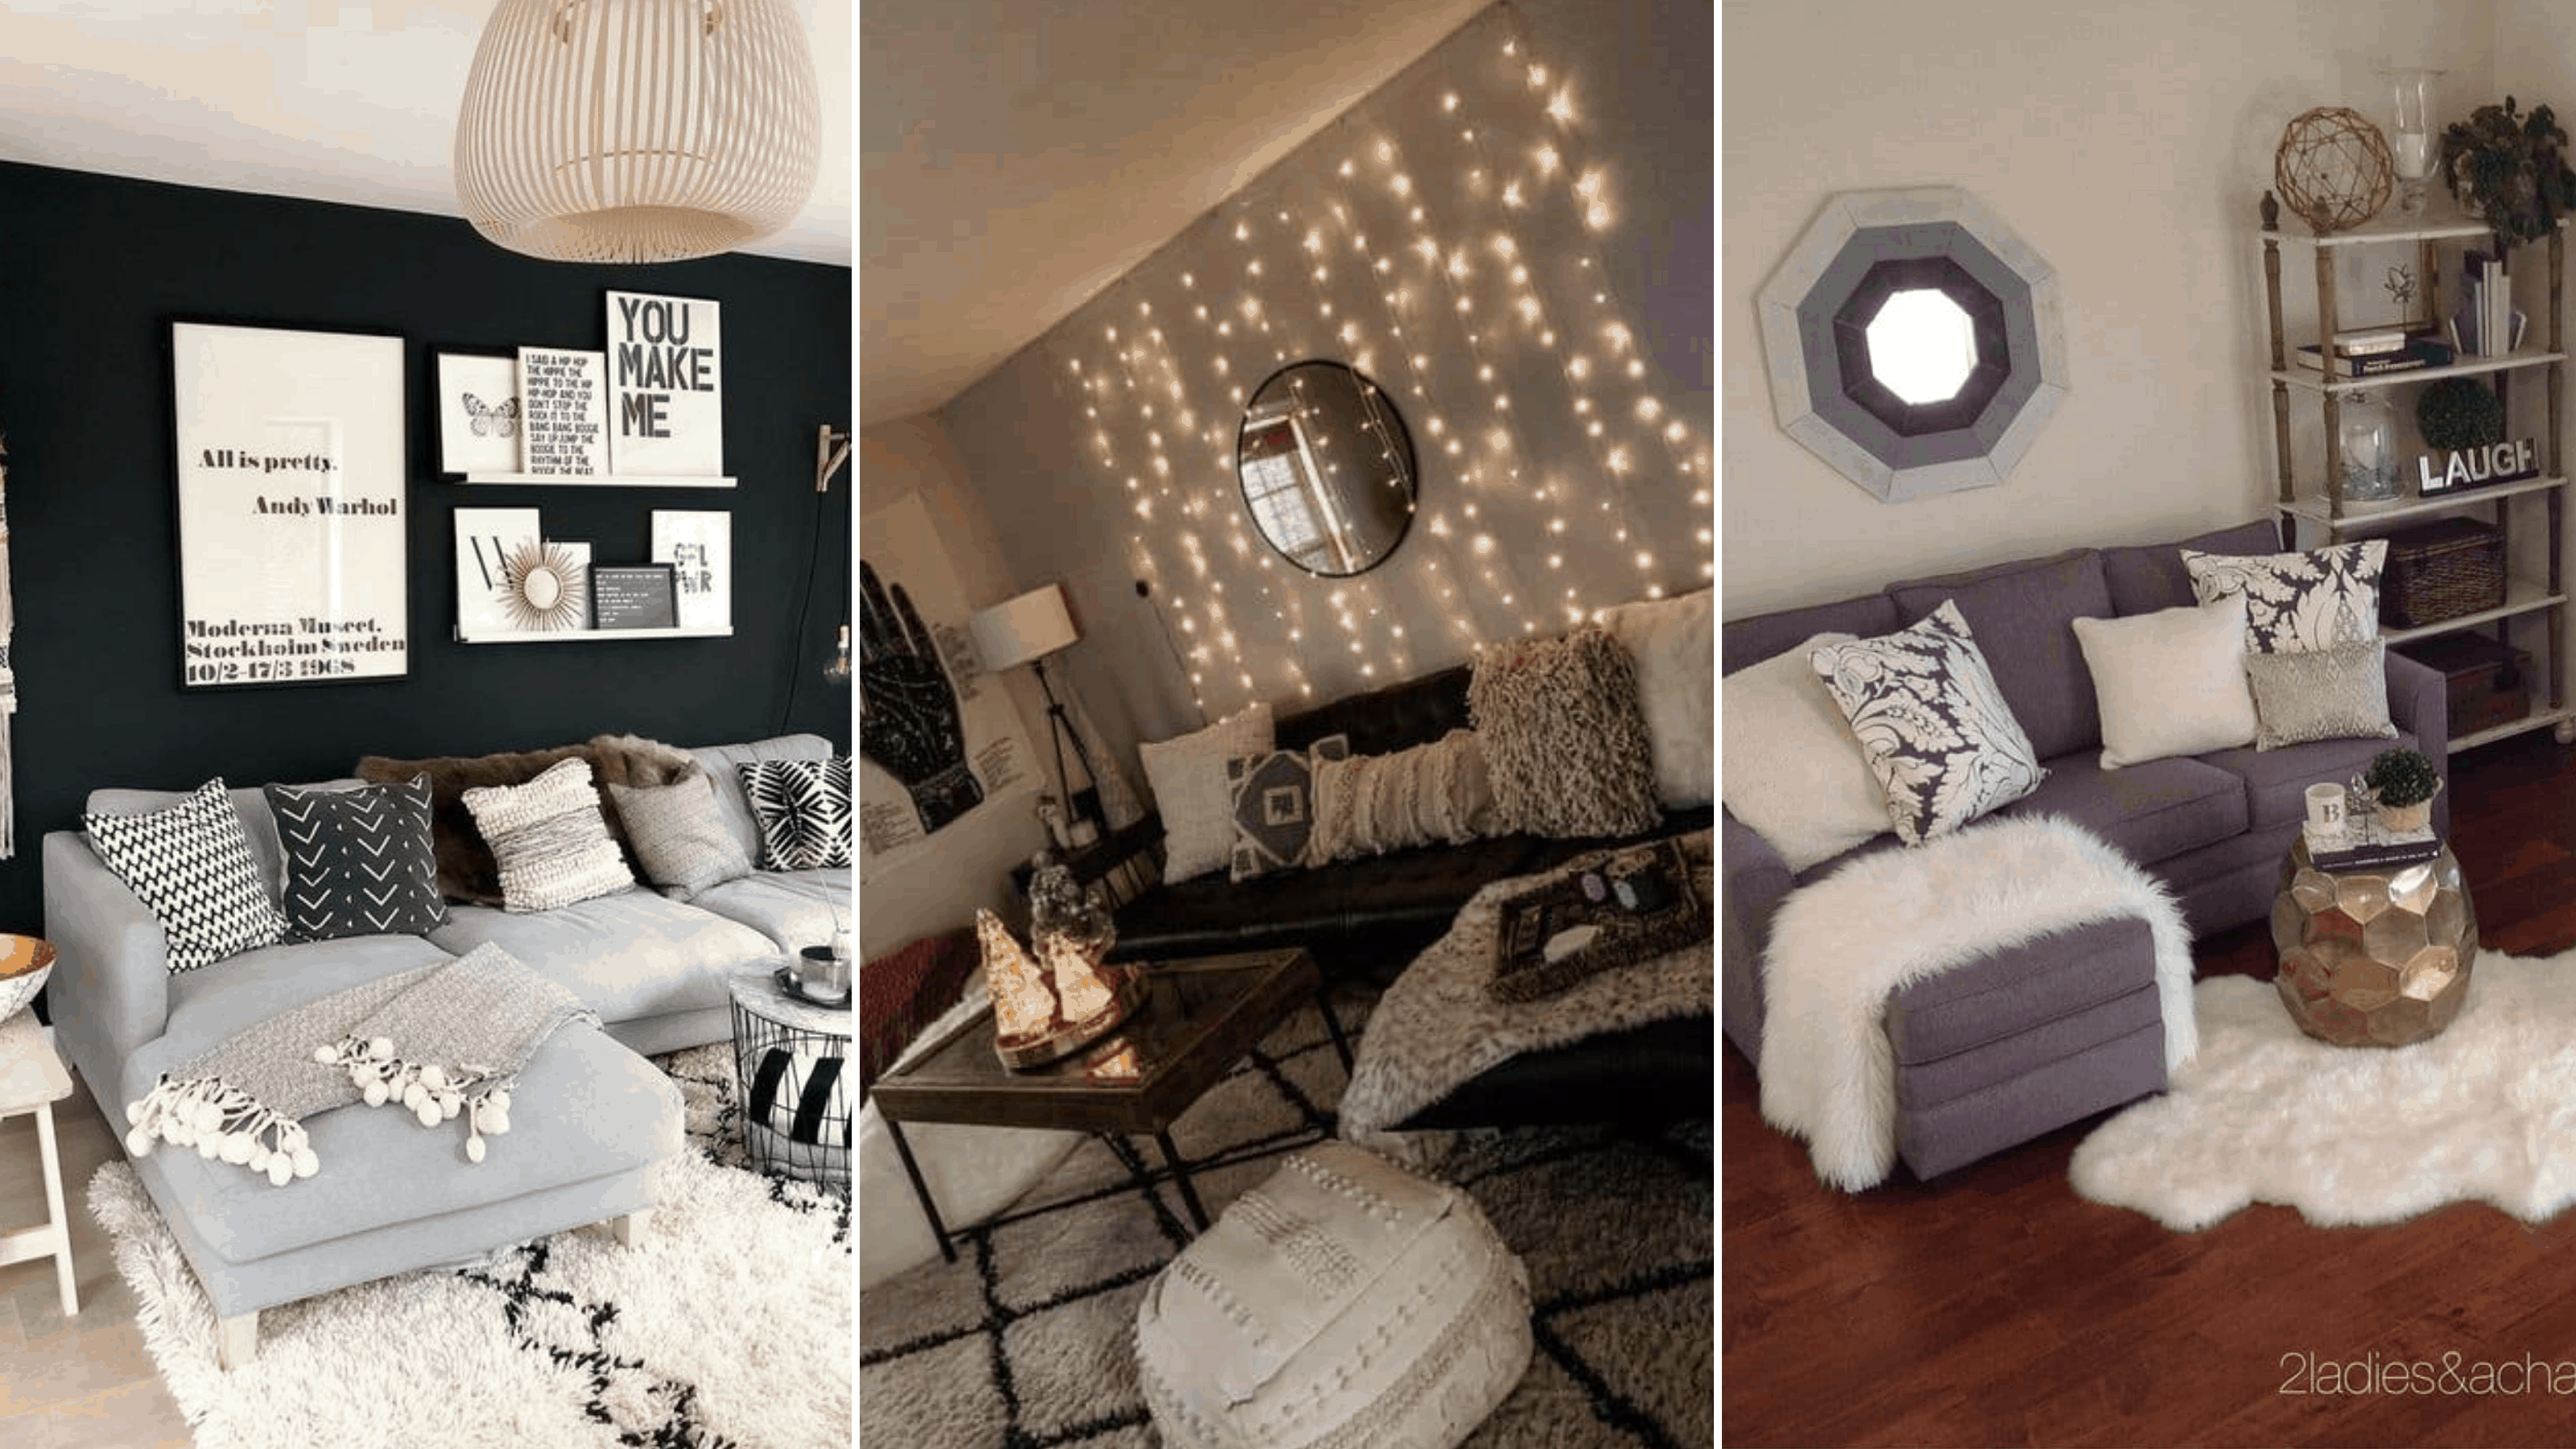 18 Genius College Apartment Decorating Ideas on a Budget   By ...